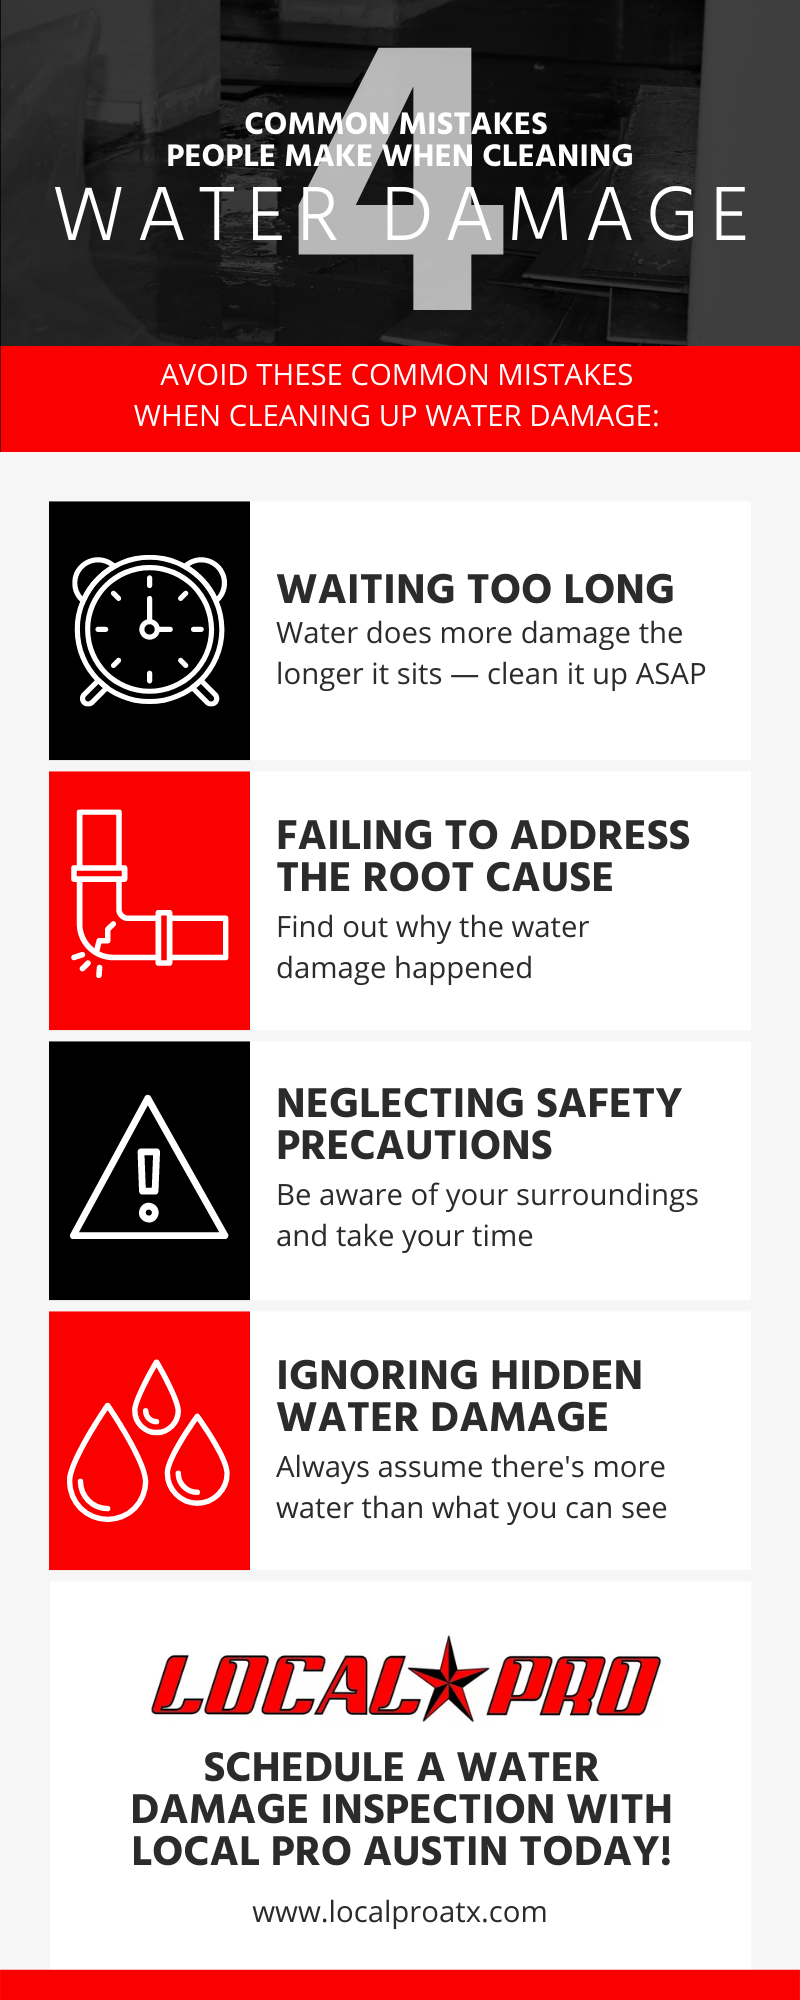 4 Common Mistakes People Make When Cleaning Water Damage Infographic.png